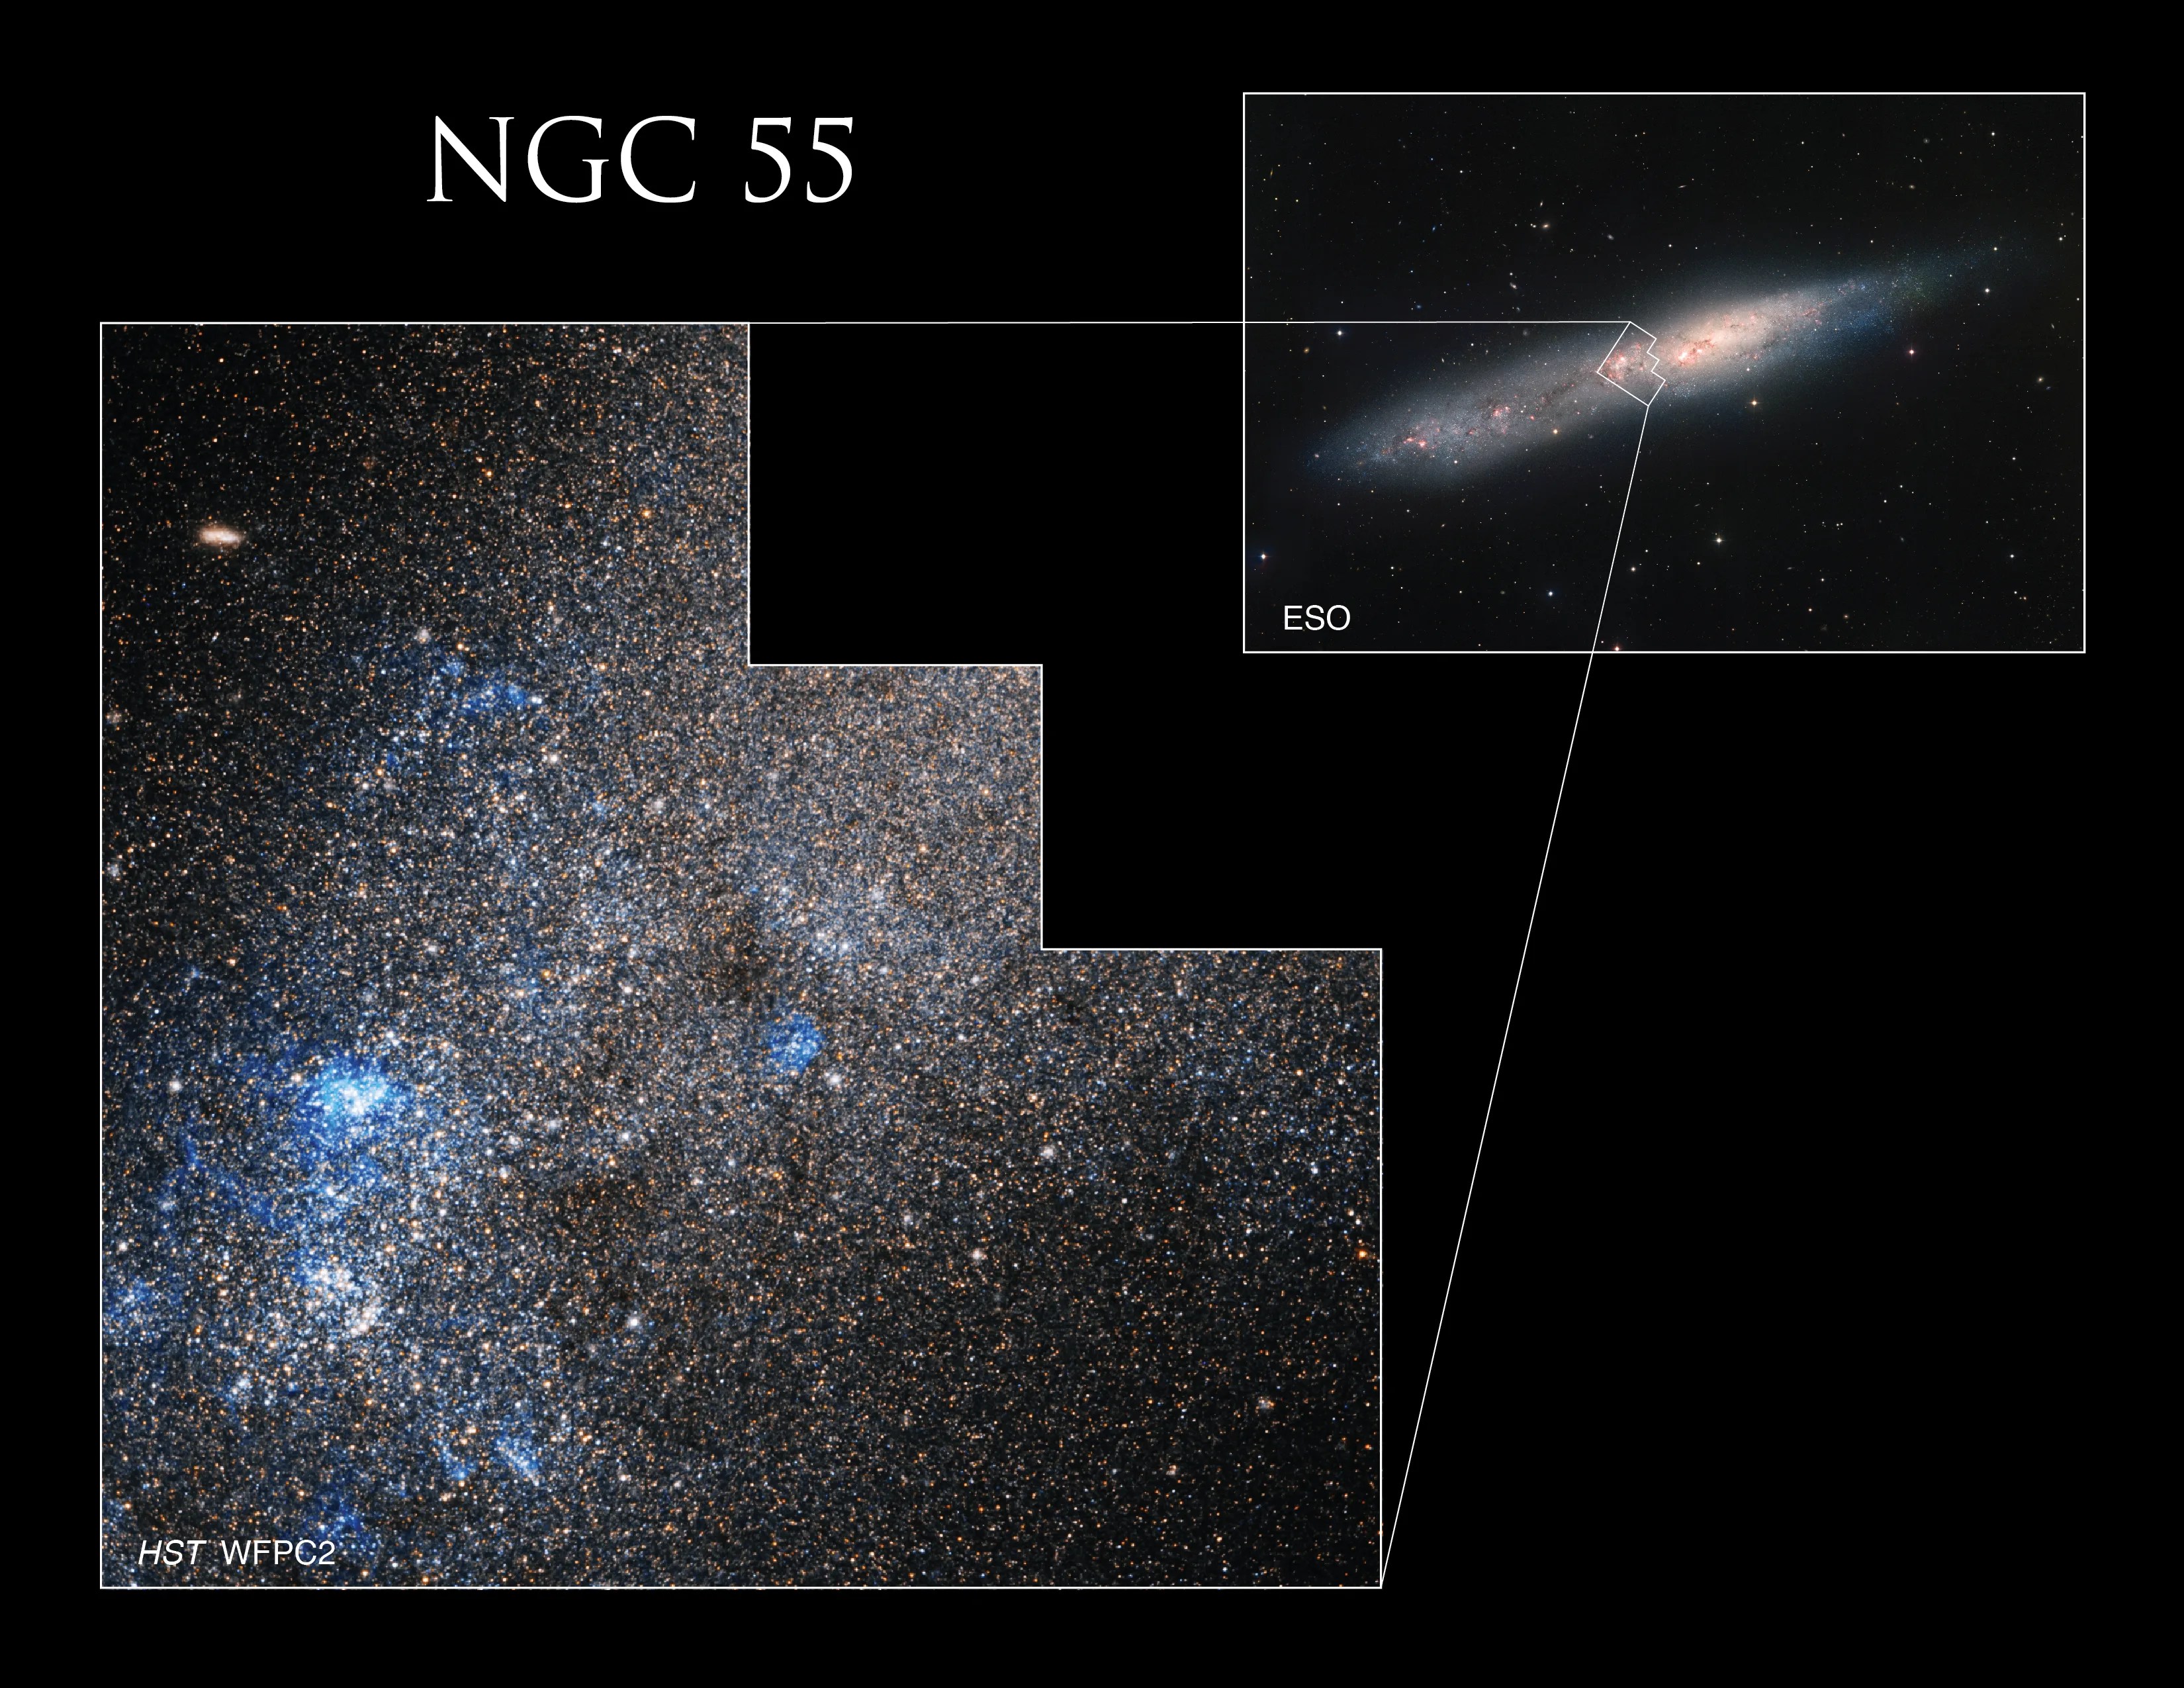 This is an inset image of C72 near the galactic center. The most notable feature is a "chunk" of bright blue stars on the lower left of the inset.